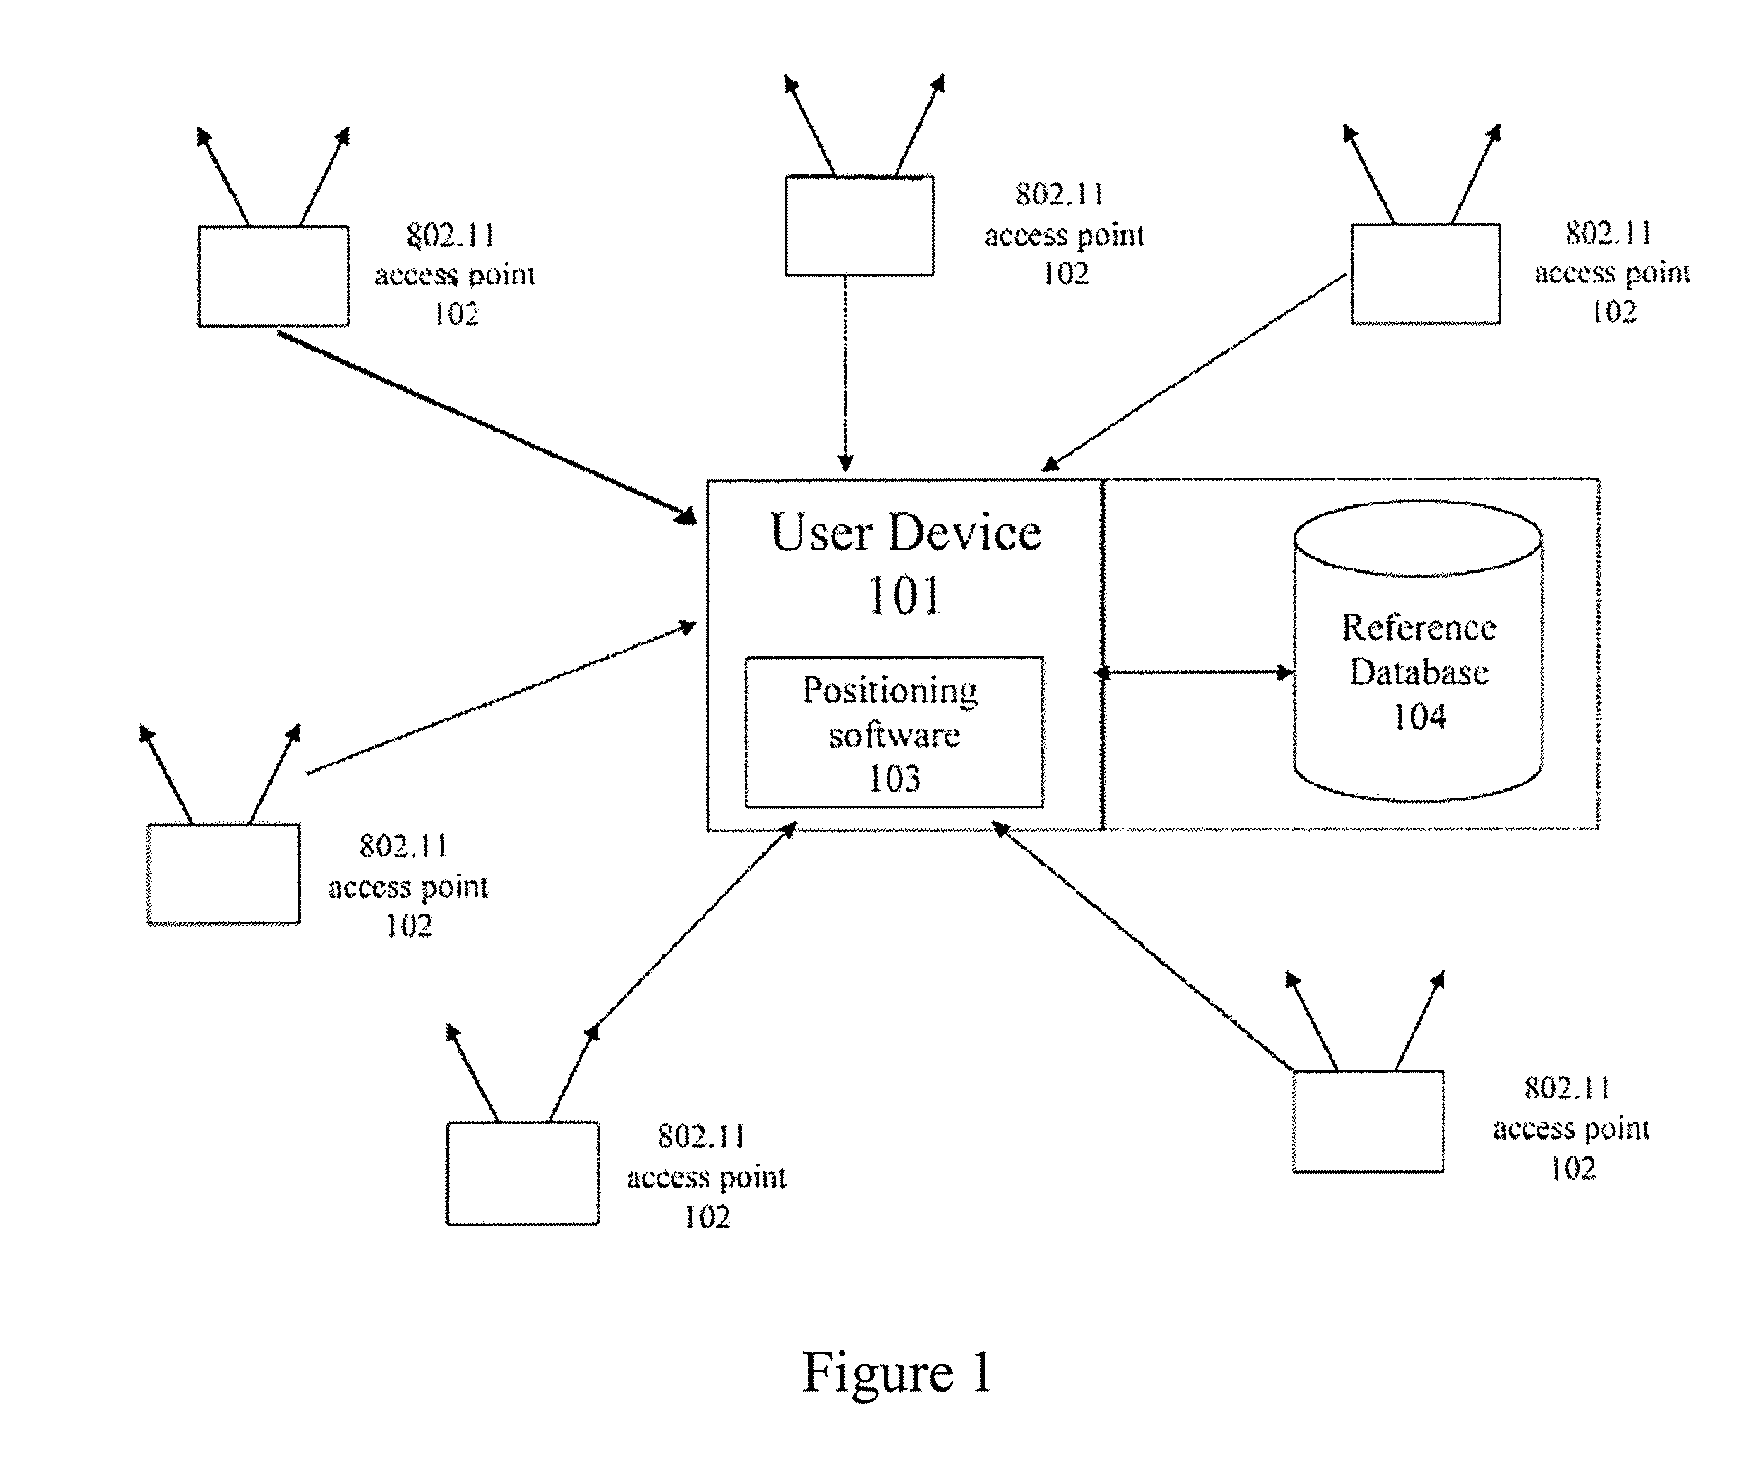 System and method of gathering WLAN packet samples to improve position estimates of WLAN positioning device